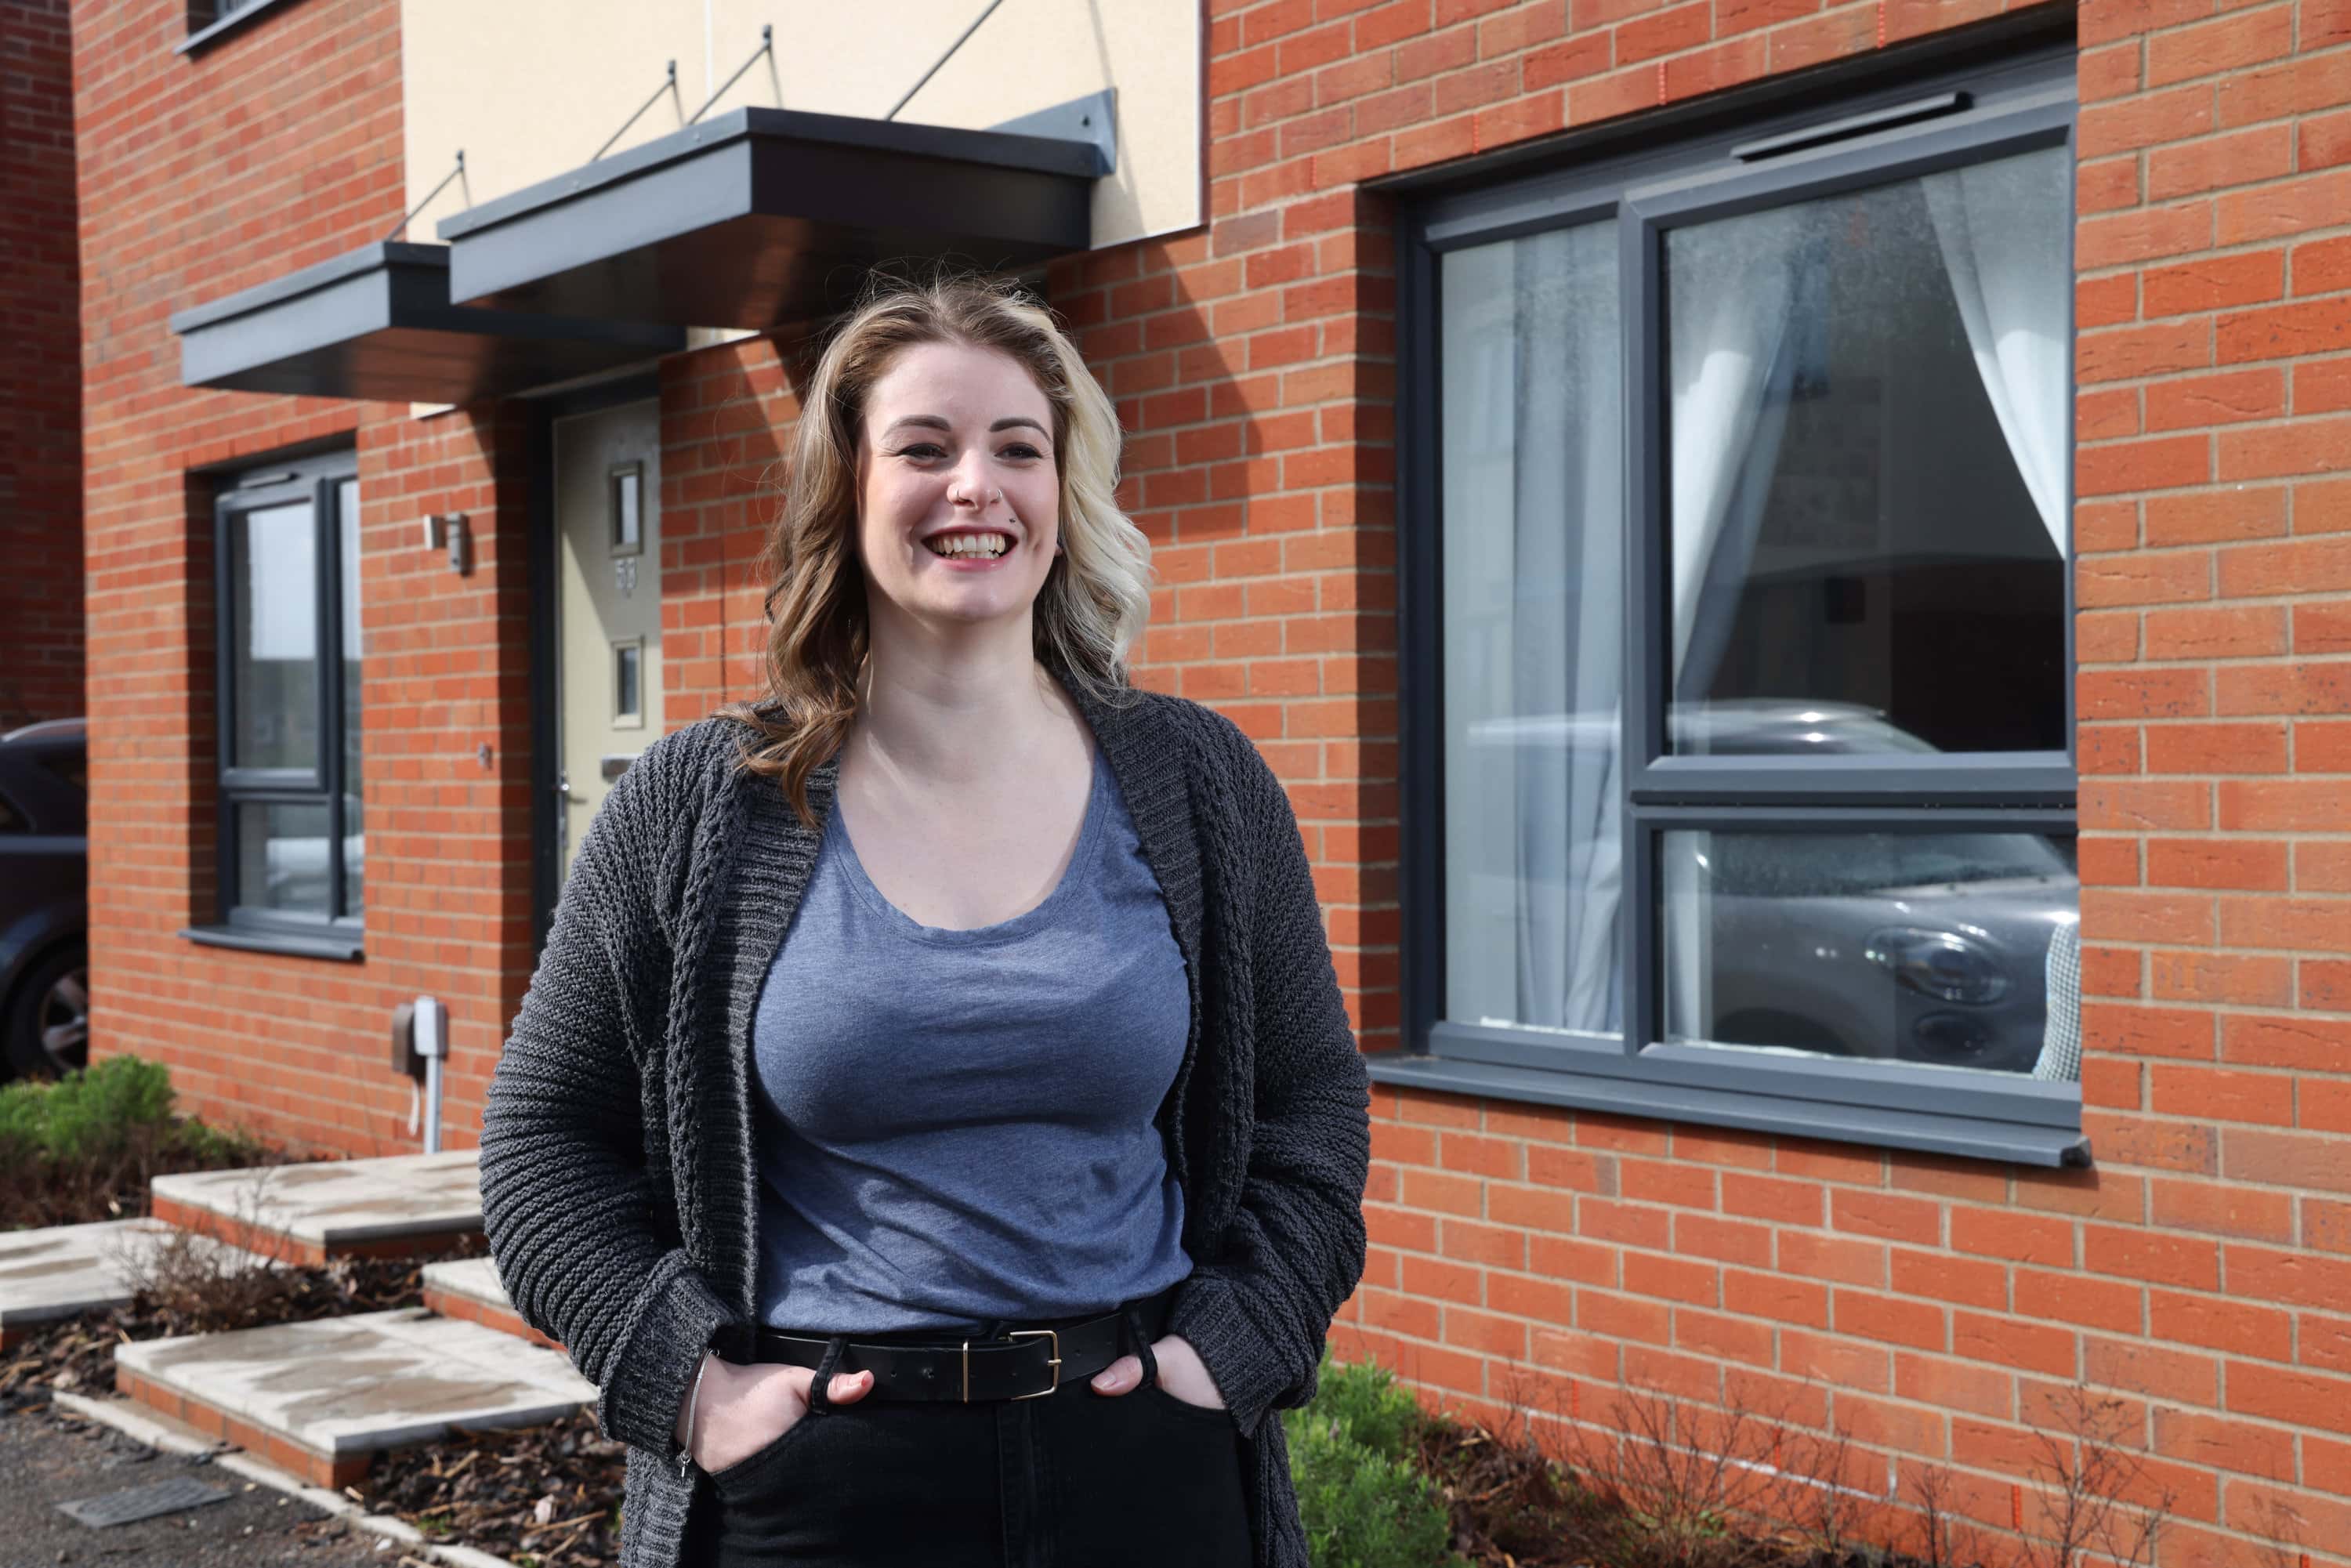 Image of first time buyer Rebecca at the Foxglove Meadows development by Abri Homes - available to purchase through Shared Ownership!